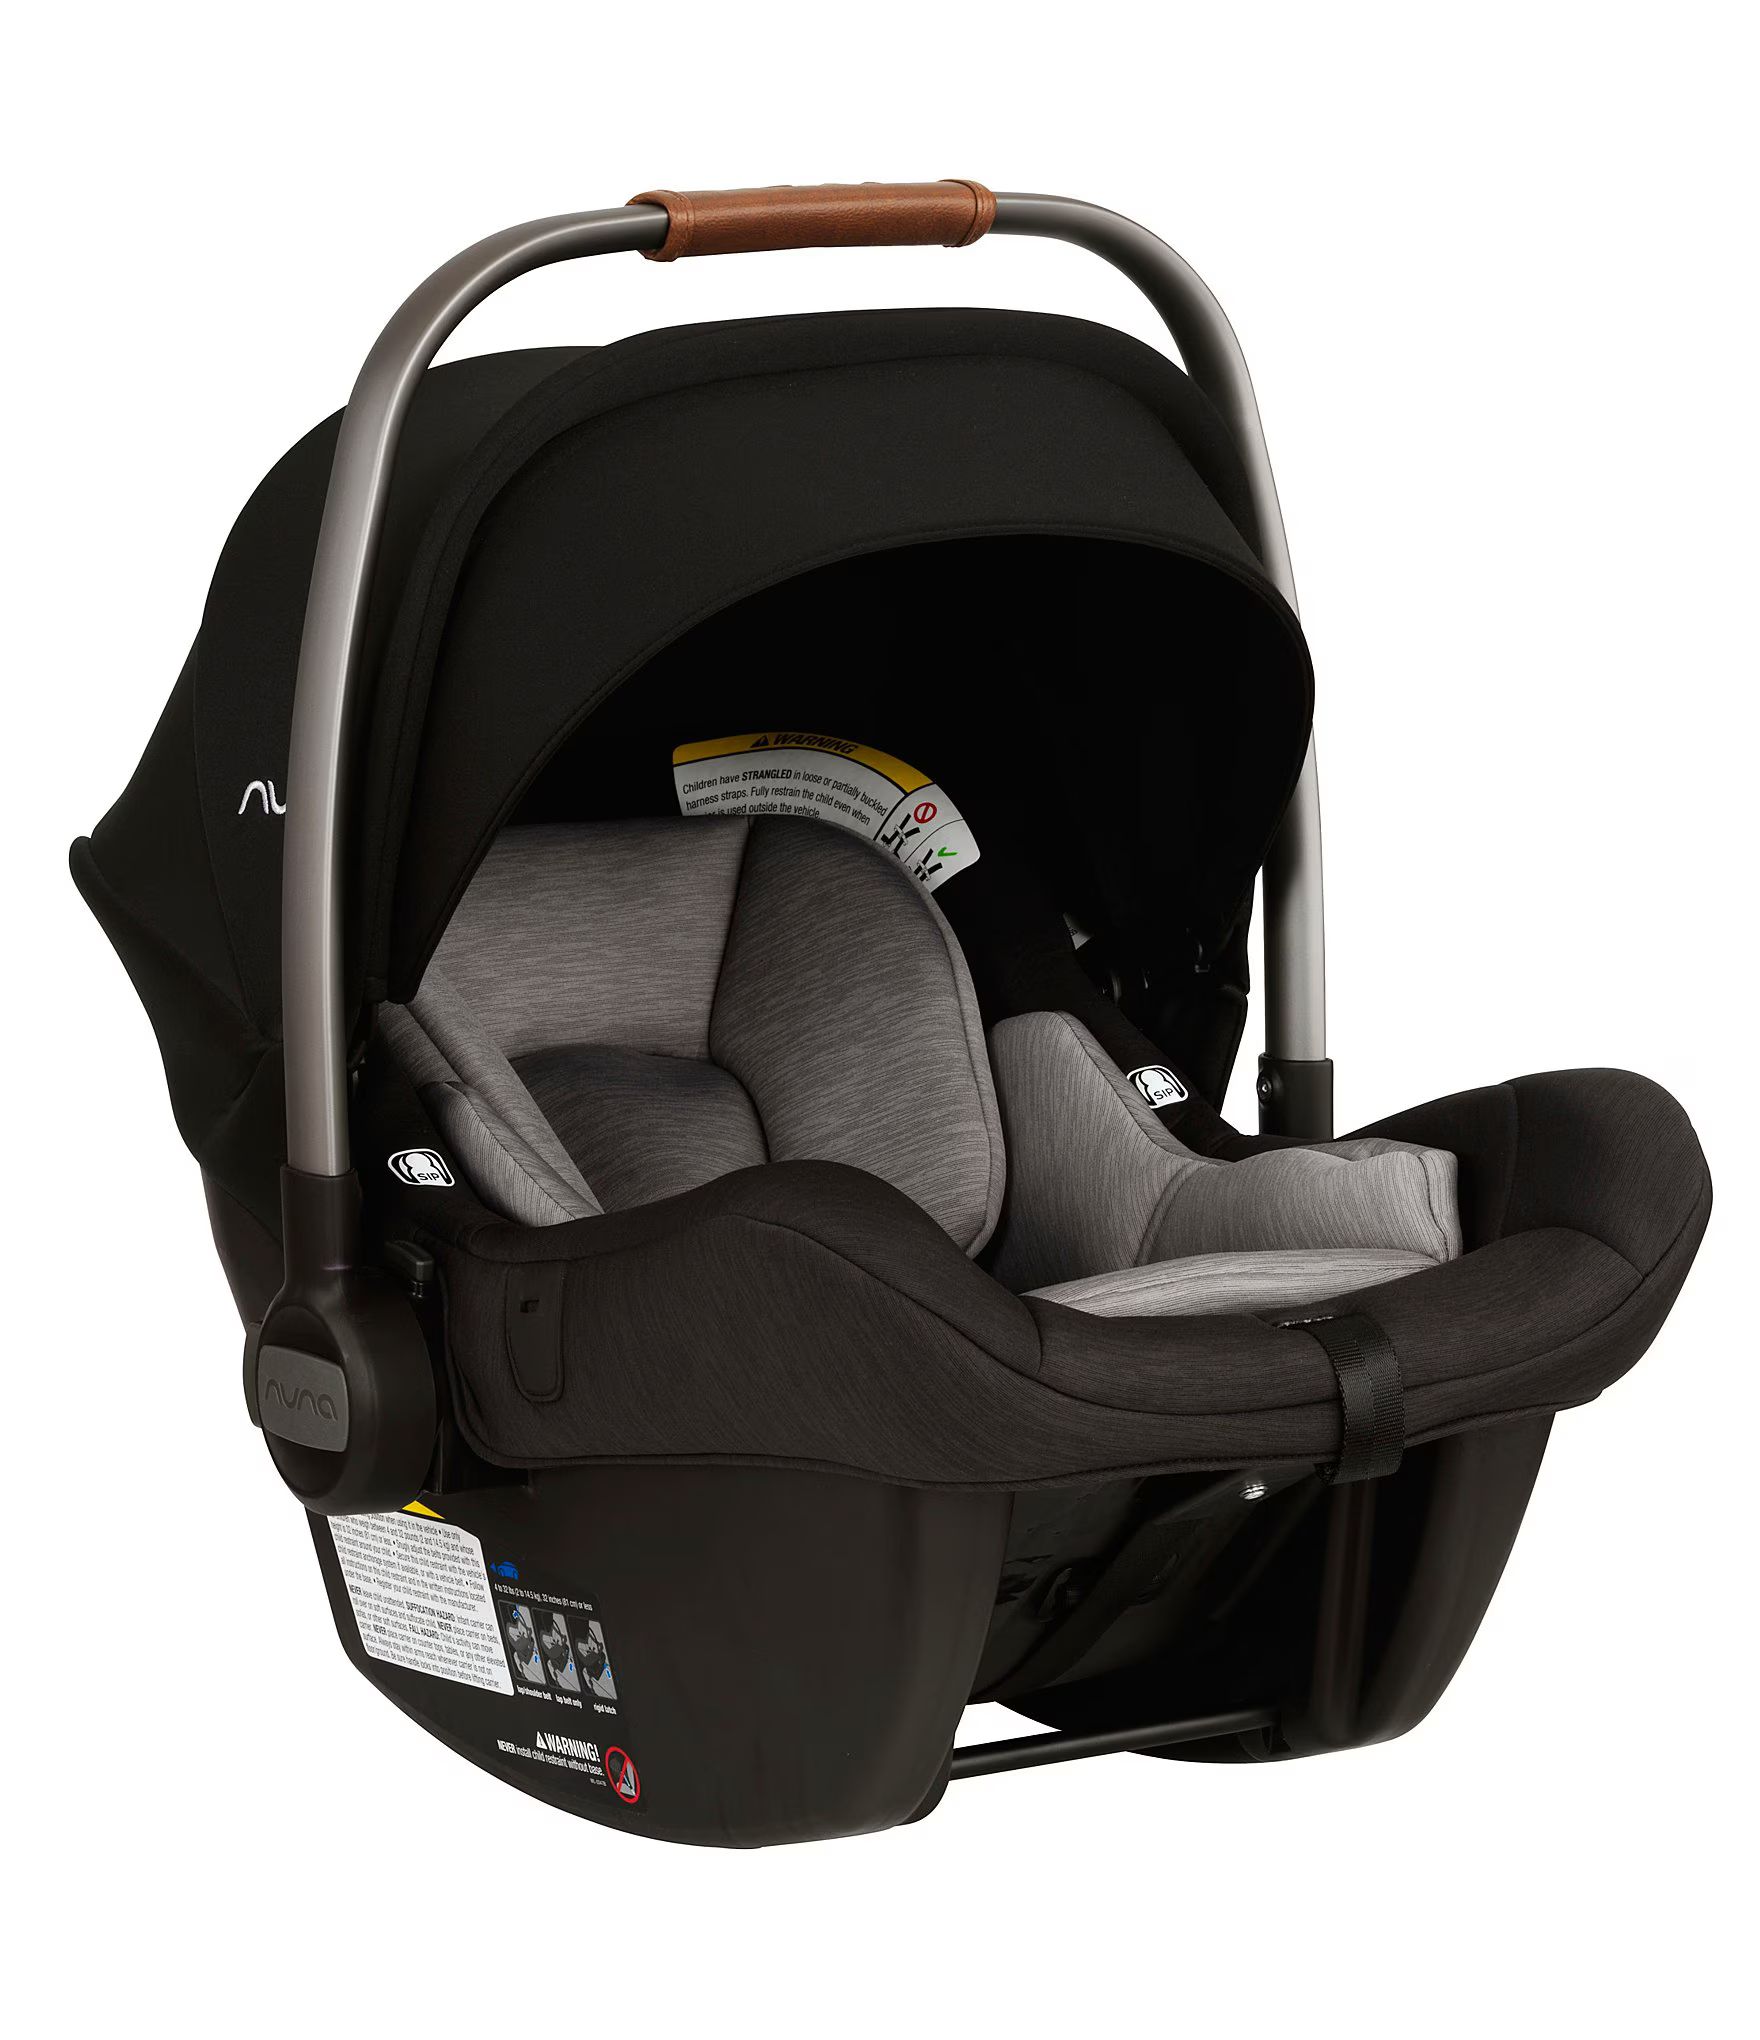 NunaPipa Lite Car Seat and Base$349.95shippingSHIPS FREE TODAY! - Exclusions ApplyFull StarFull S... | Dillards